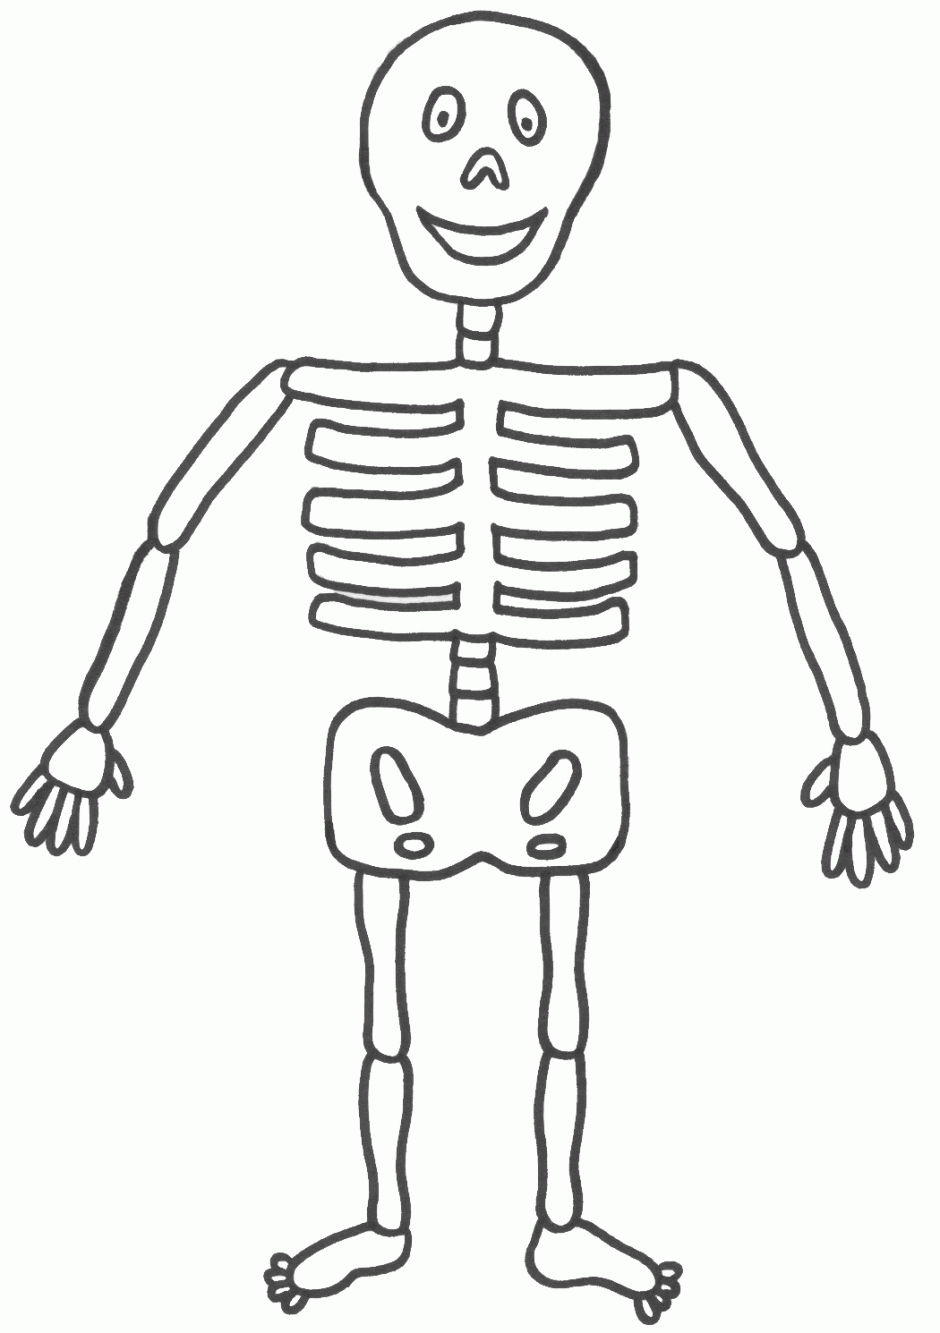 Skeleton Coloring Pages - Free Large Images | Coloring Pages - Free Printable Skeleton Coloring Pages